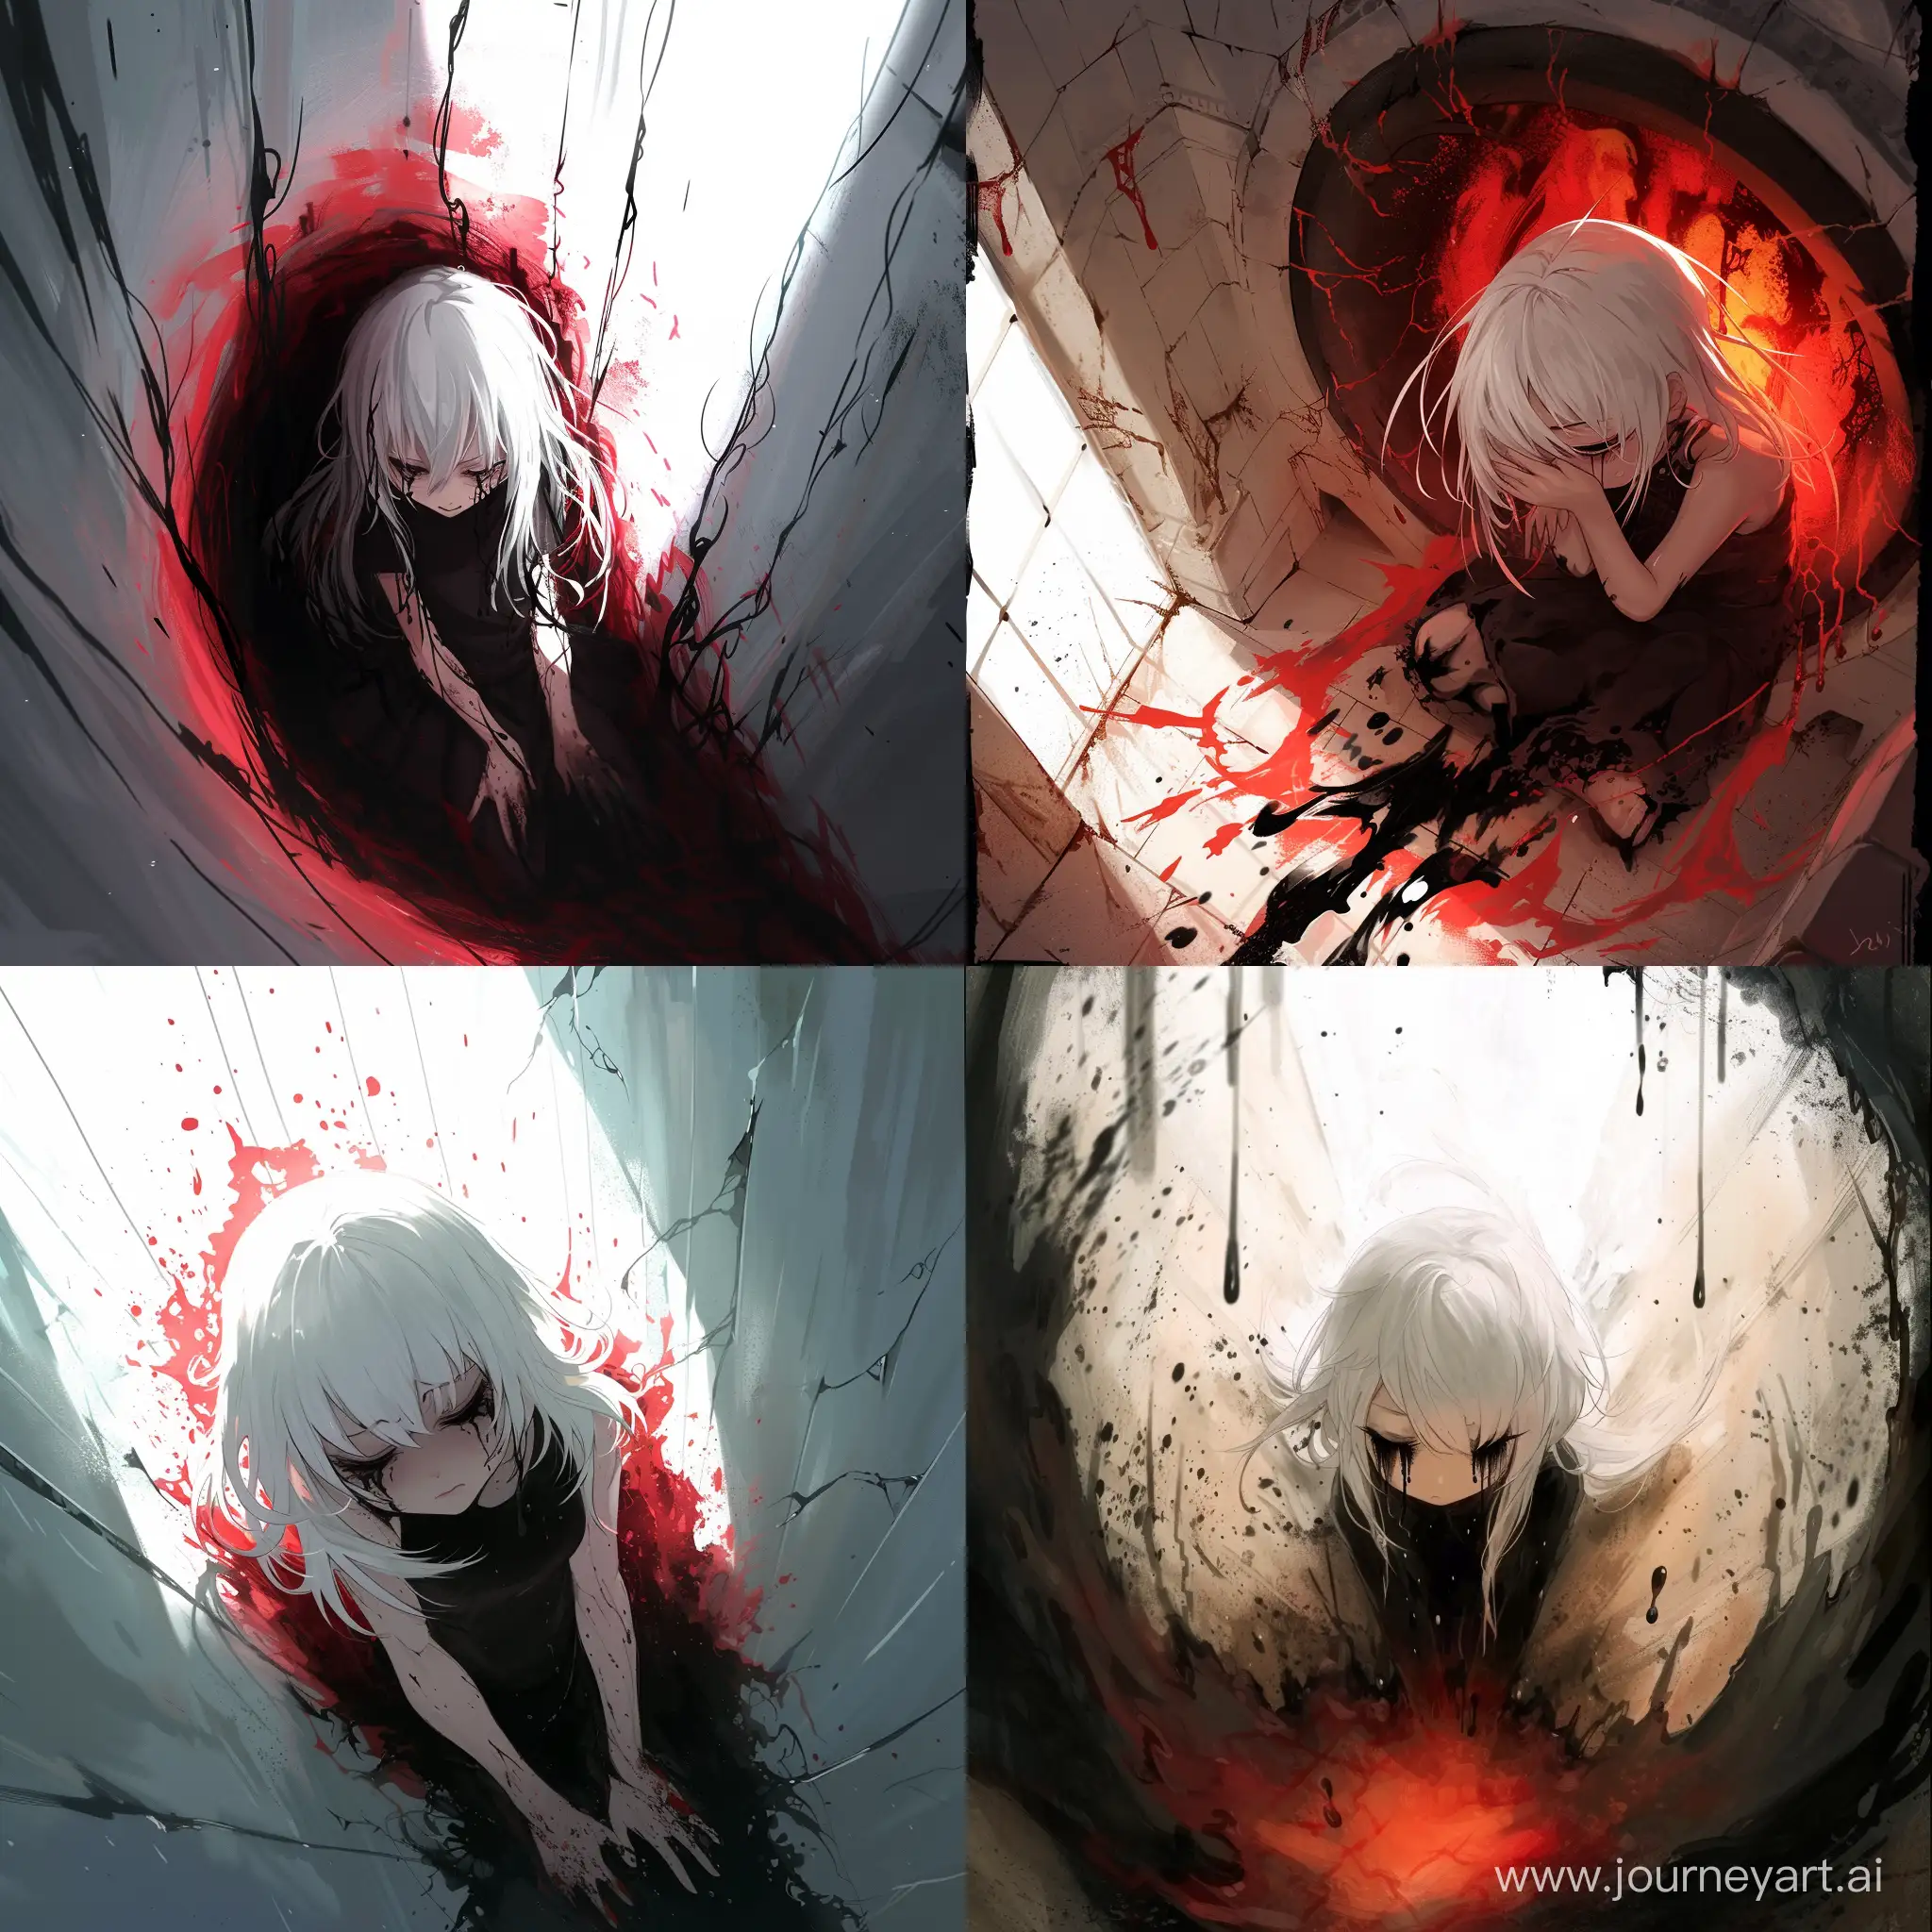 Depressed-WhiteHaired-Girl-Surrounded-by-Black-Tears-in-Bright-Sanctuary